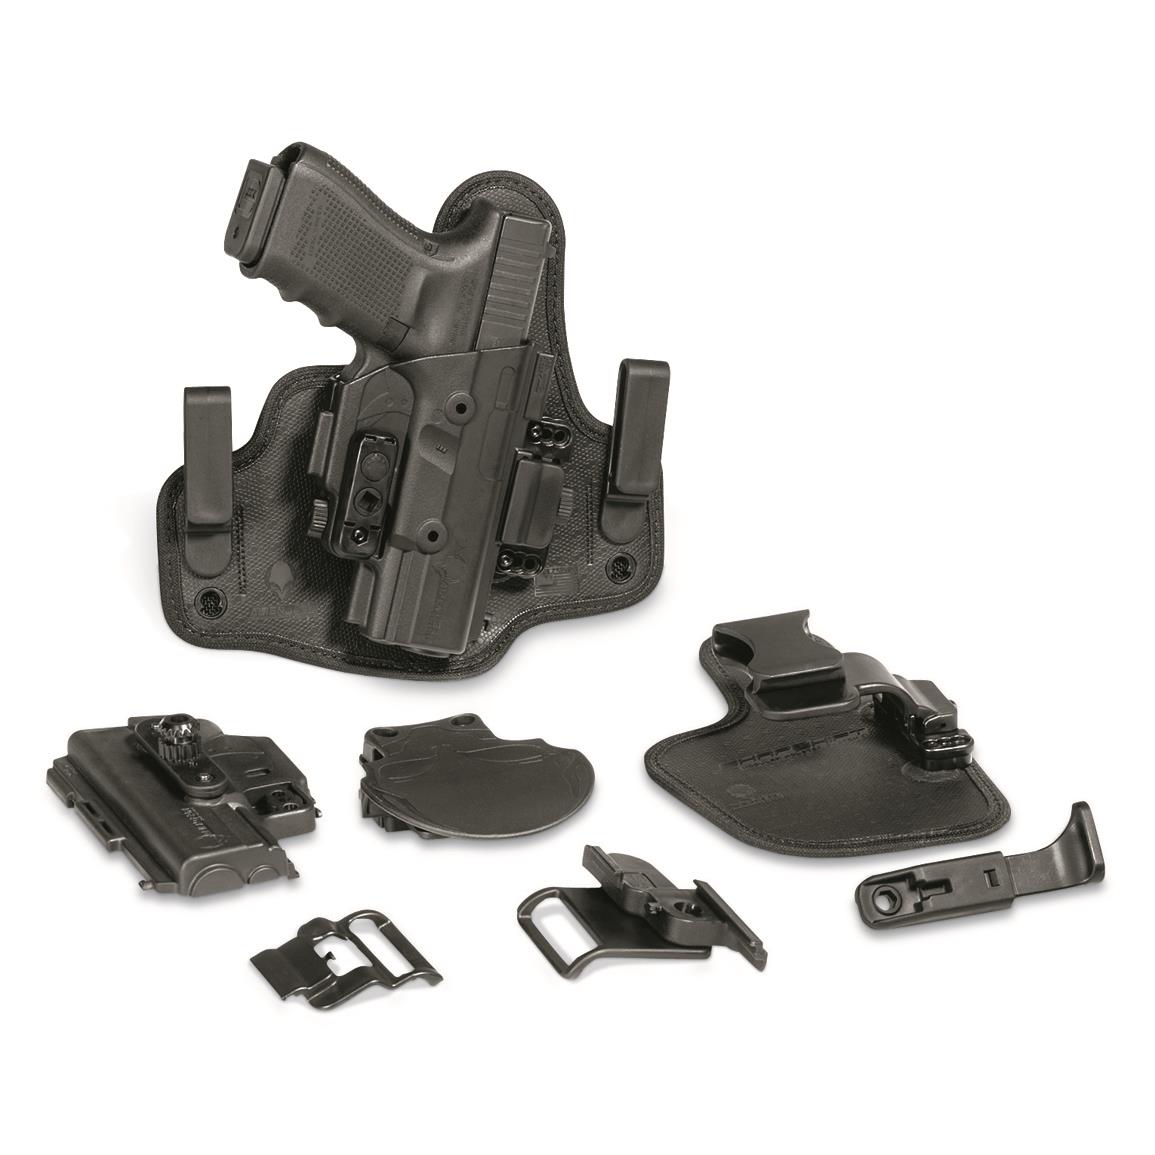 Alien Gear ShapeShift Holster Core Carry Pack, Smith & Wesson SD9 VE